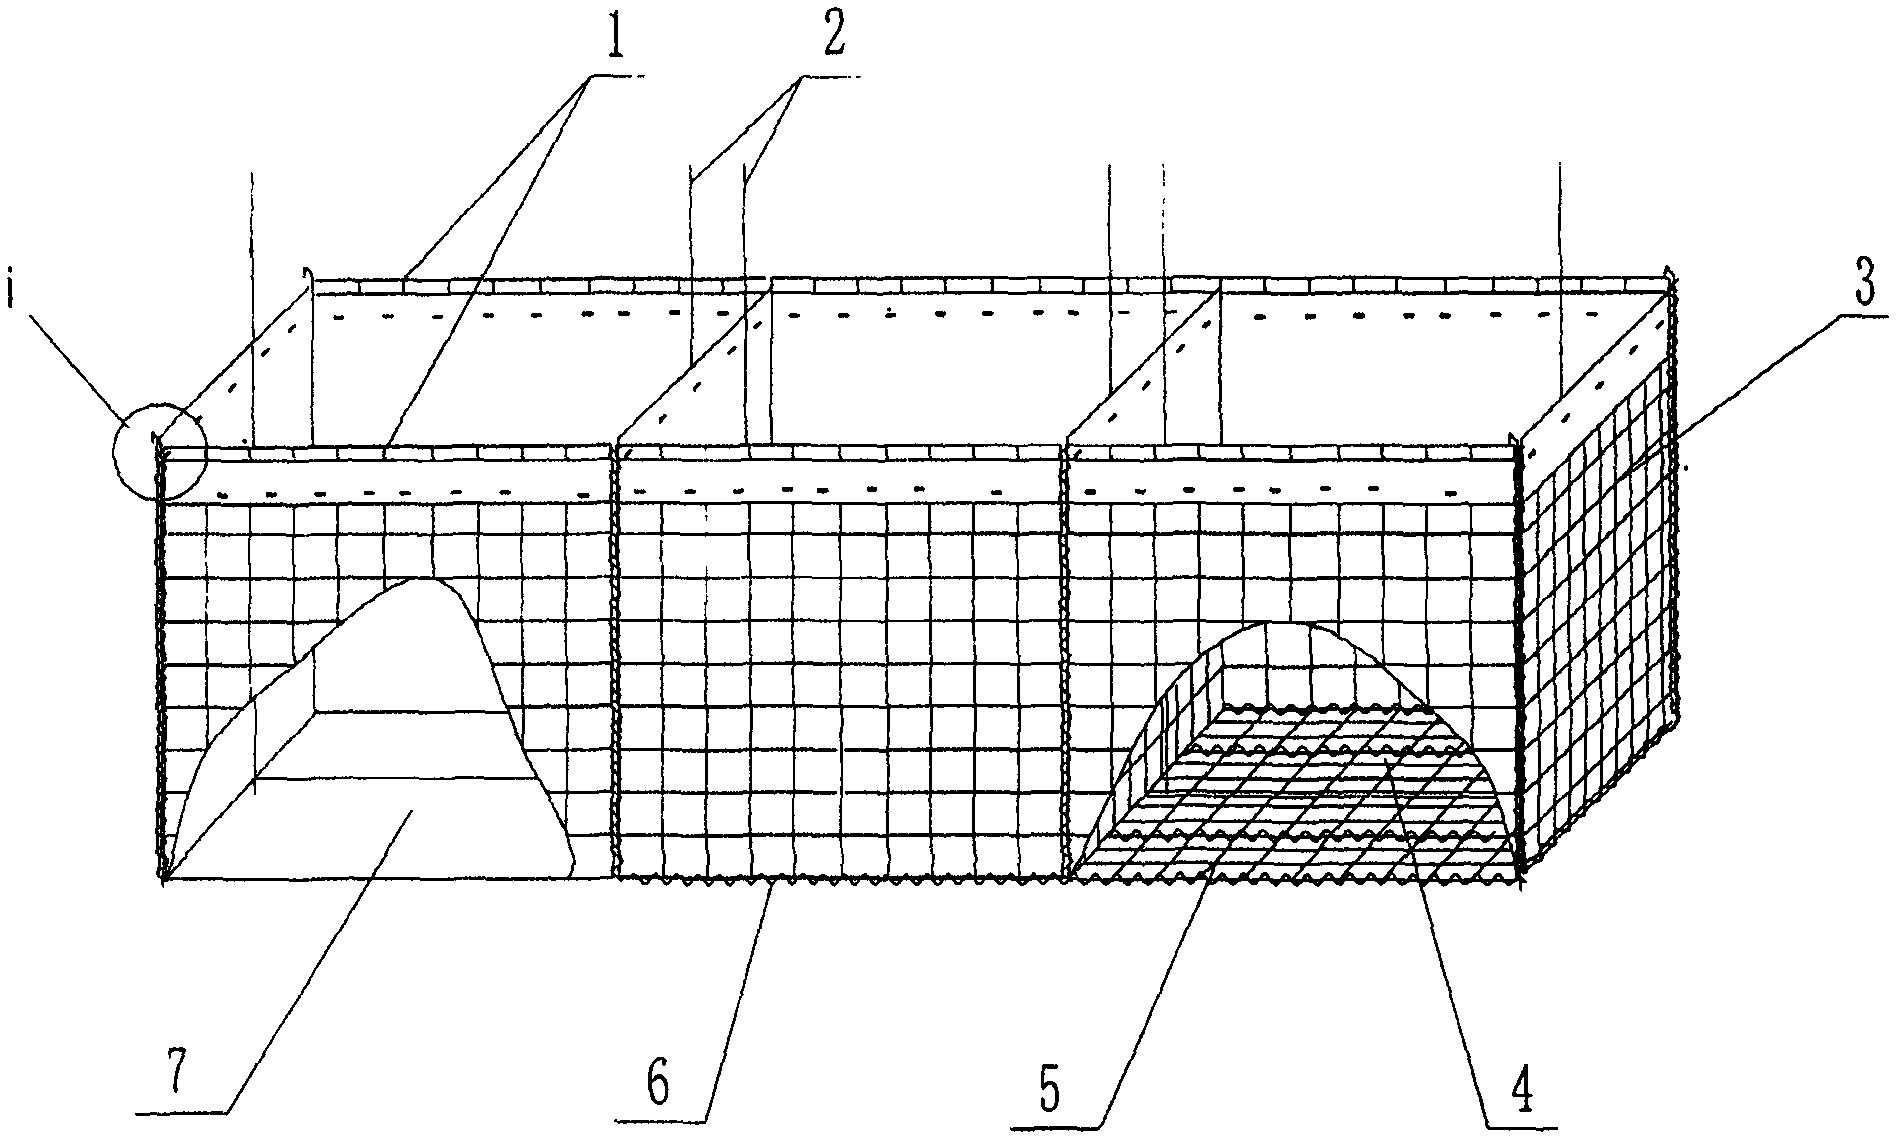 Folding protection wall capable of being removed quickly